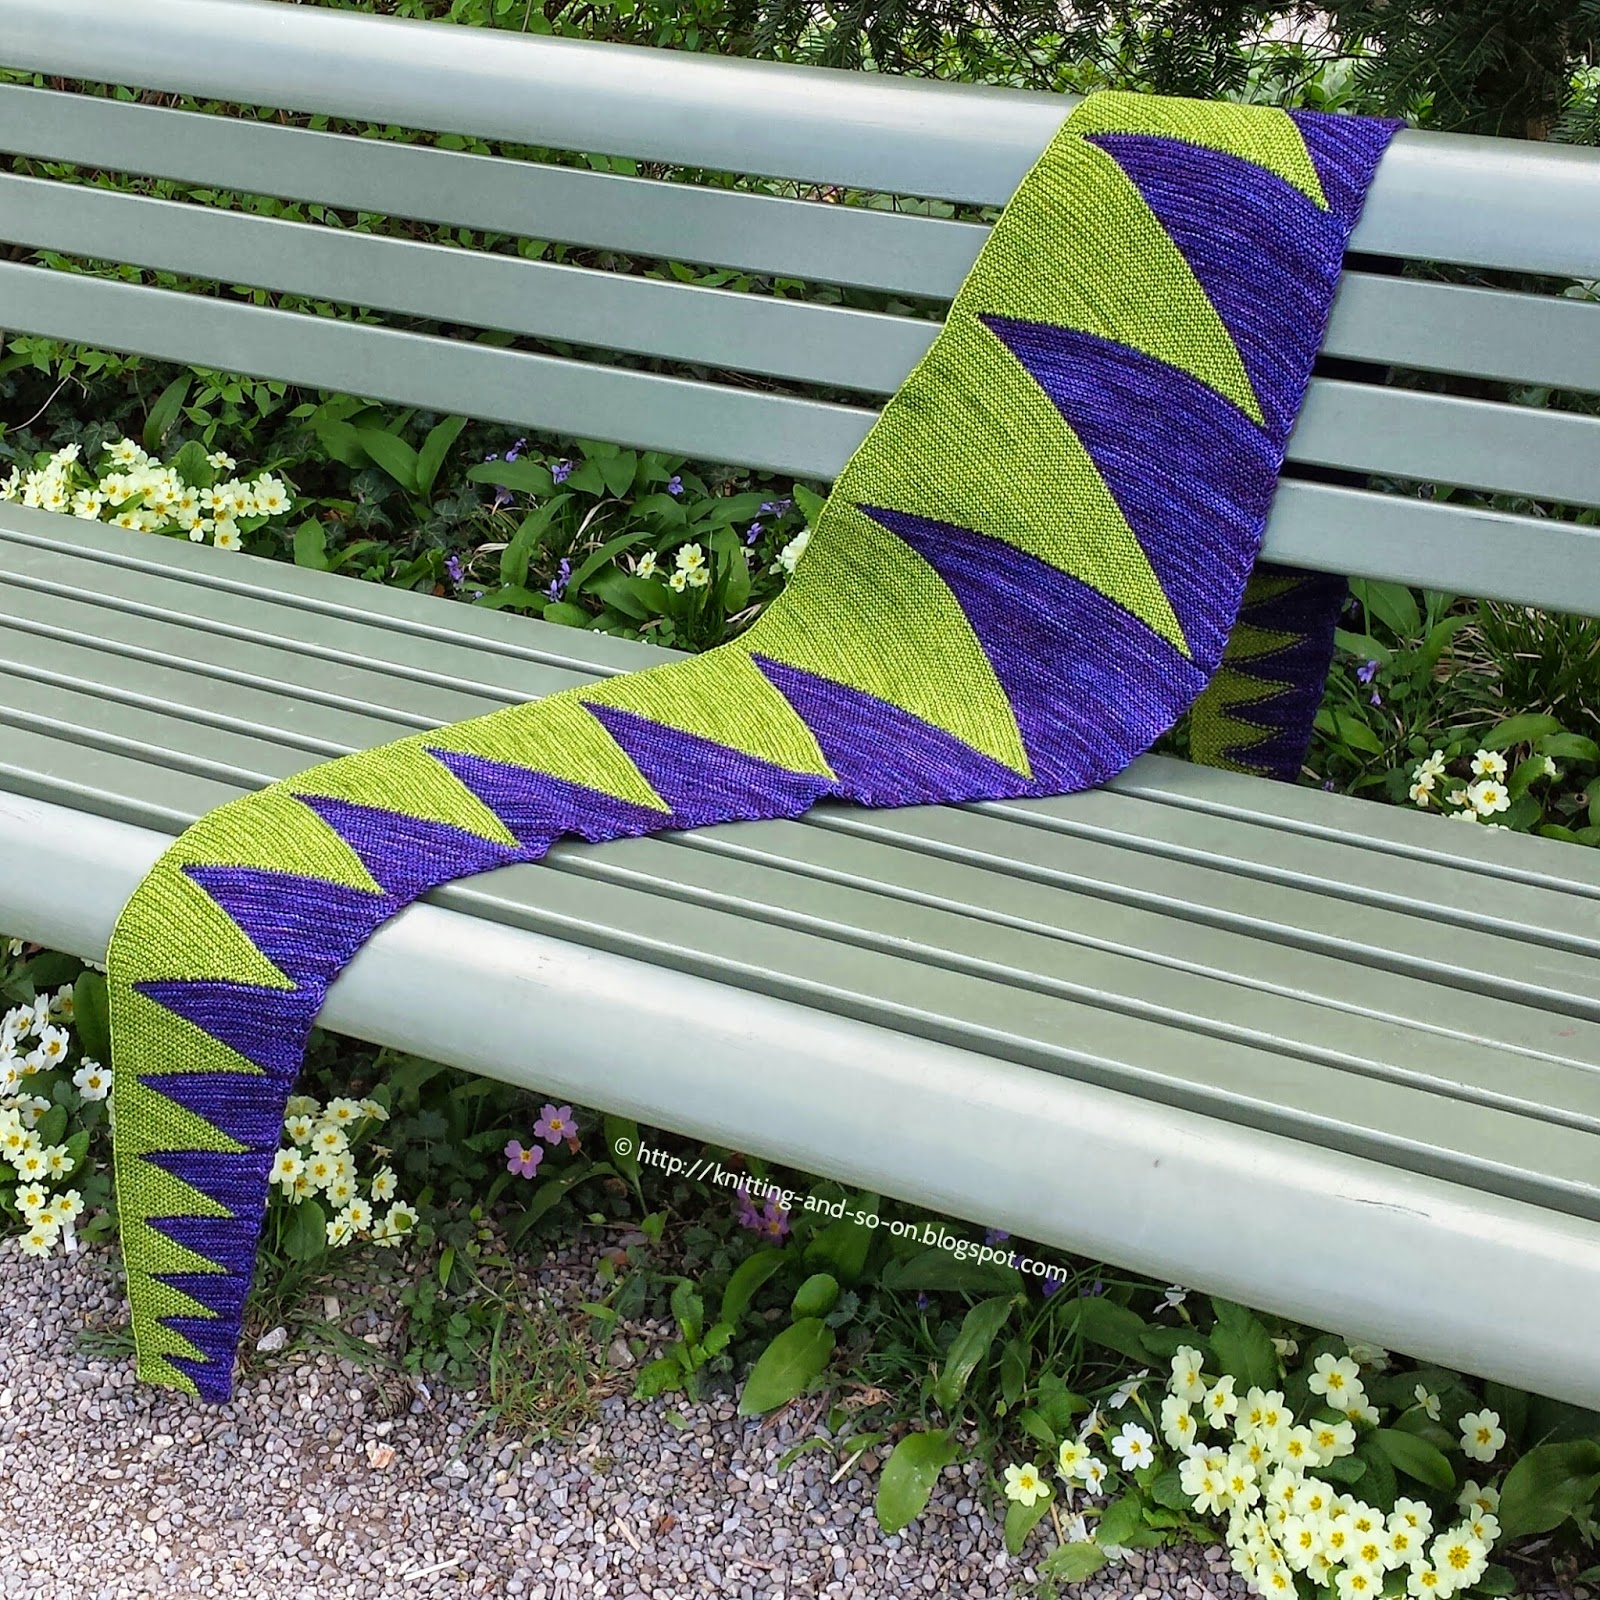 Free Knitting Pattern: Monster Tooth Scarf (http://knitting-and-so-on.blogspot.ch/)